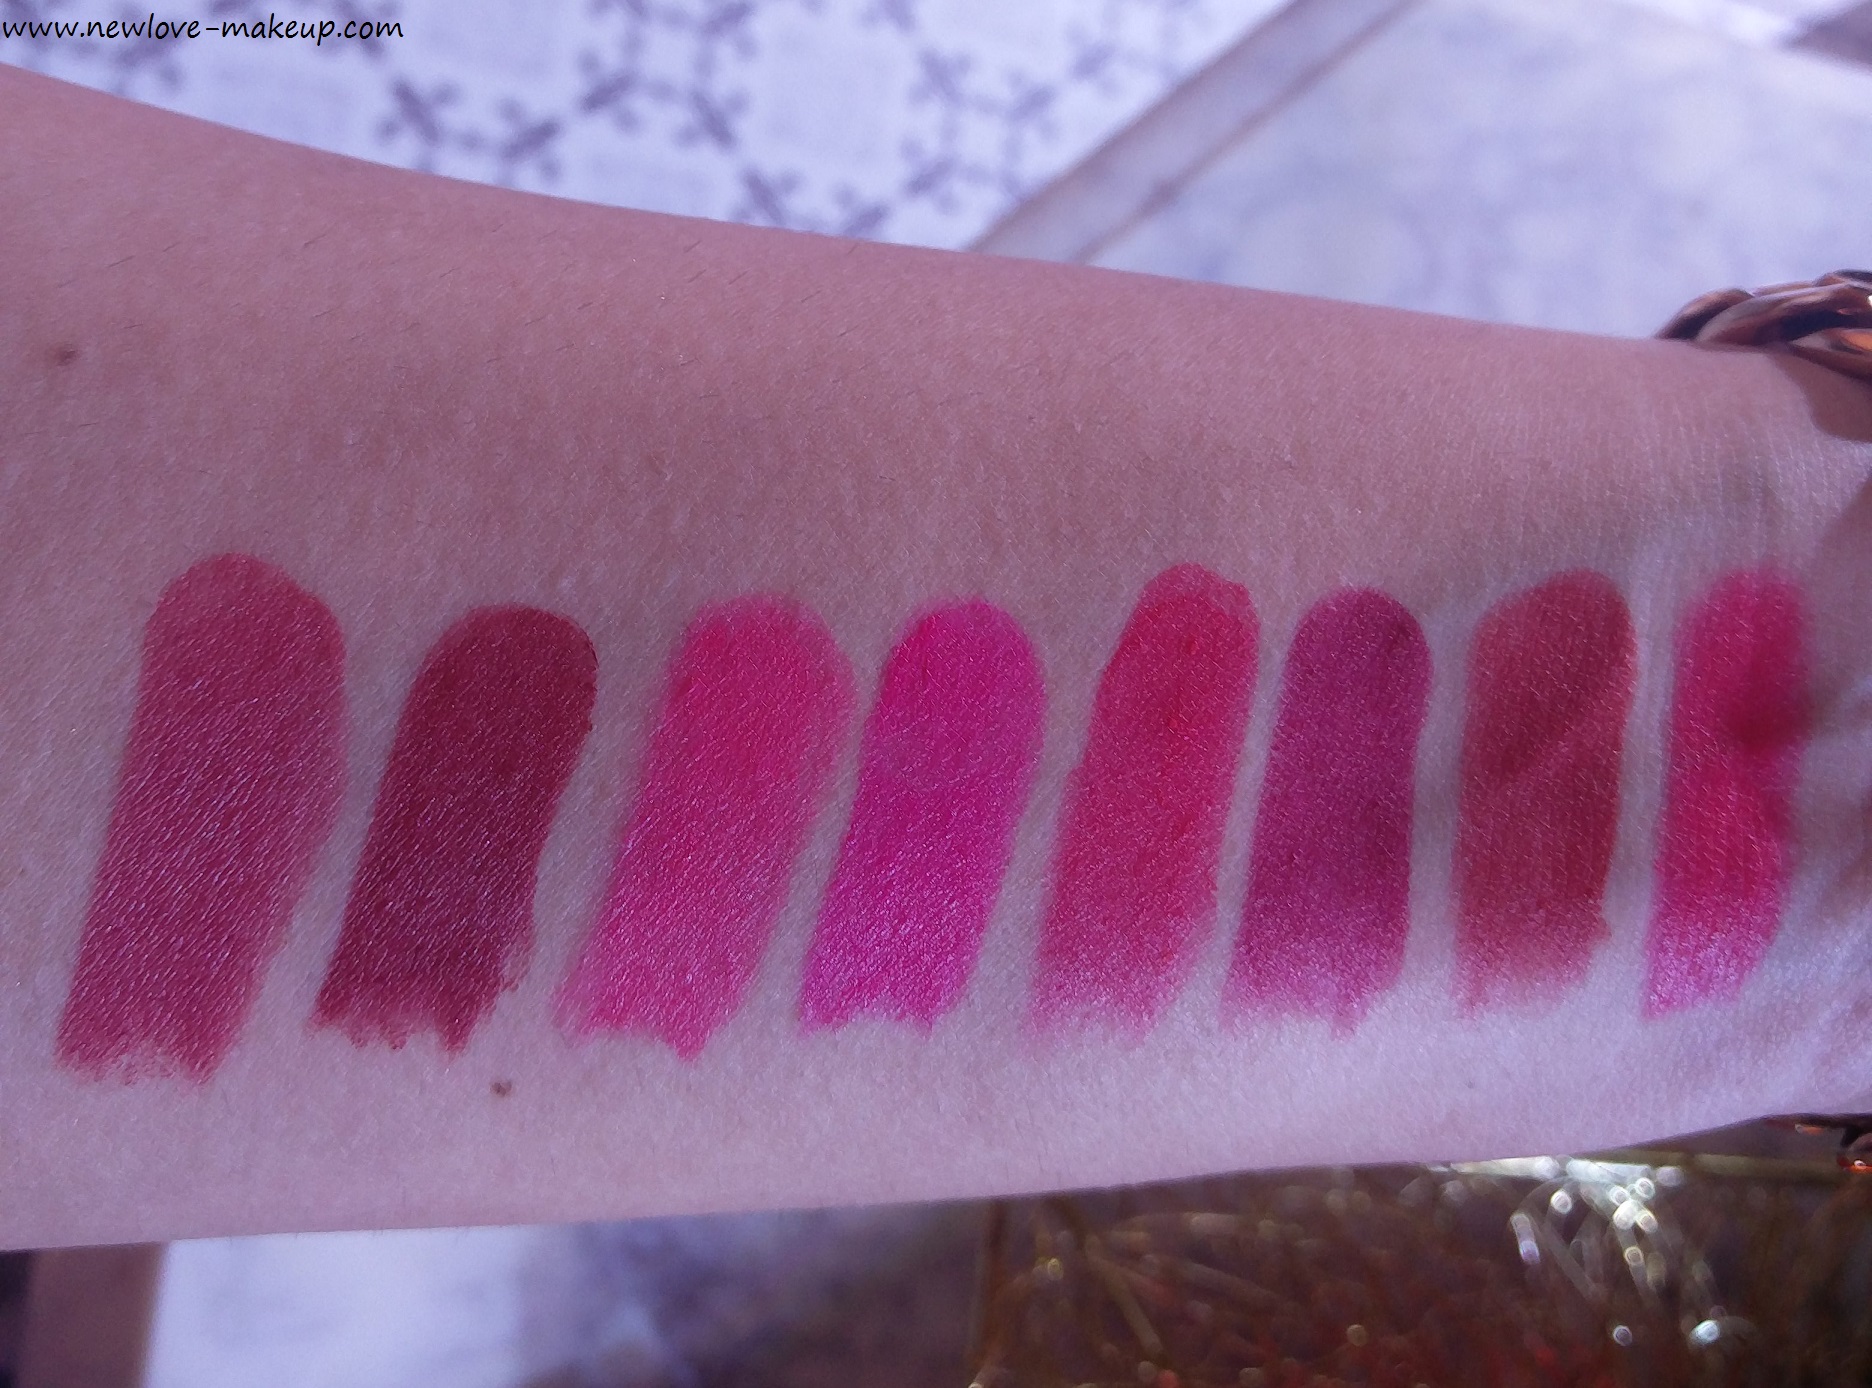 All Swatches - New Lakme Absolute Luxe Matte Lip Colour with Argan Oil